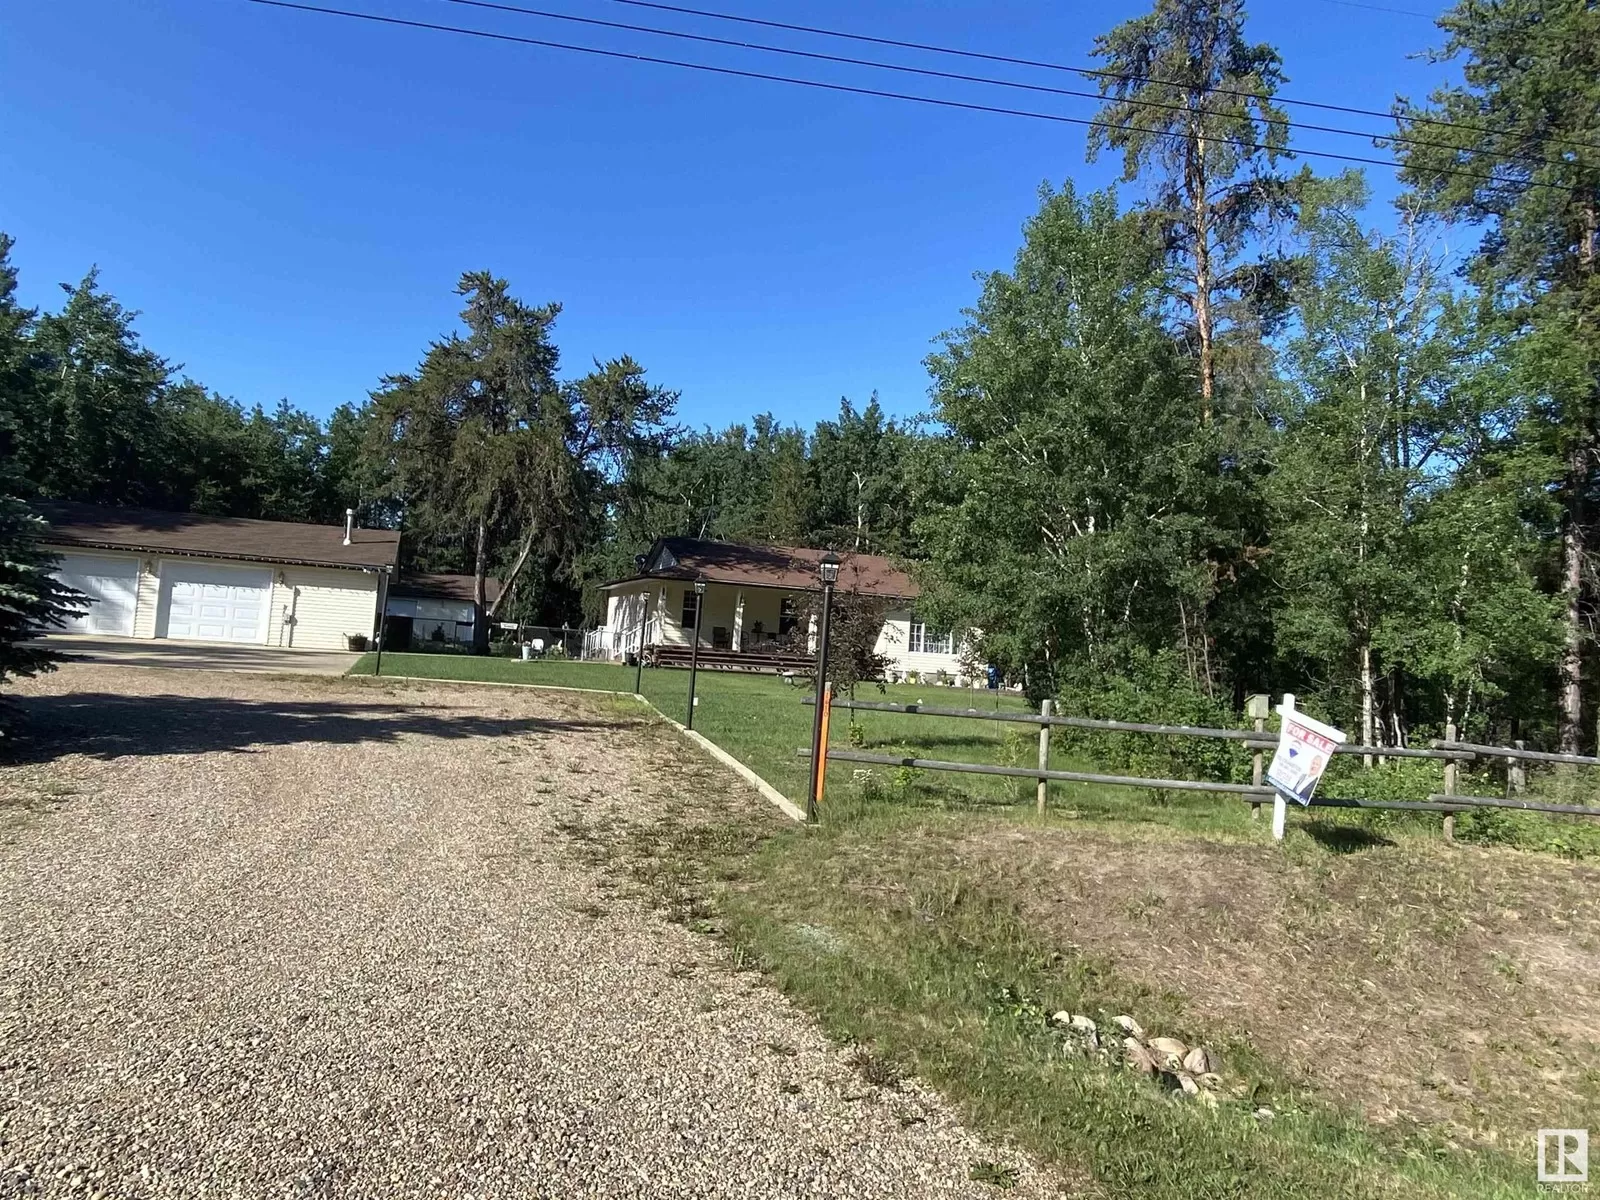 House for rent: 16435 Sandy Cr, Rural Smoky Lake County, Alberta T0A 3C0